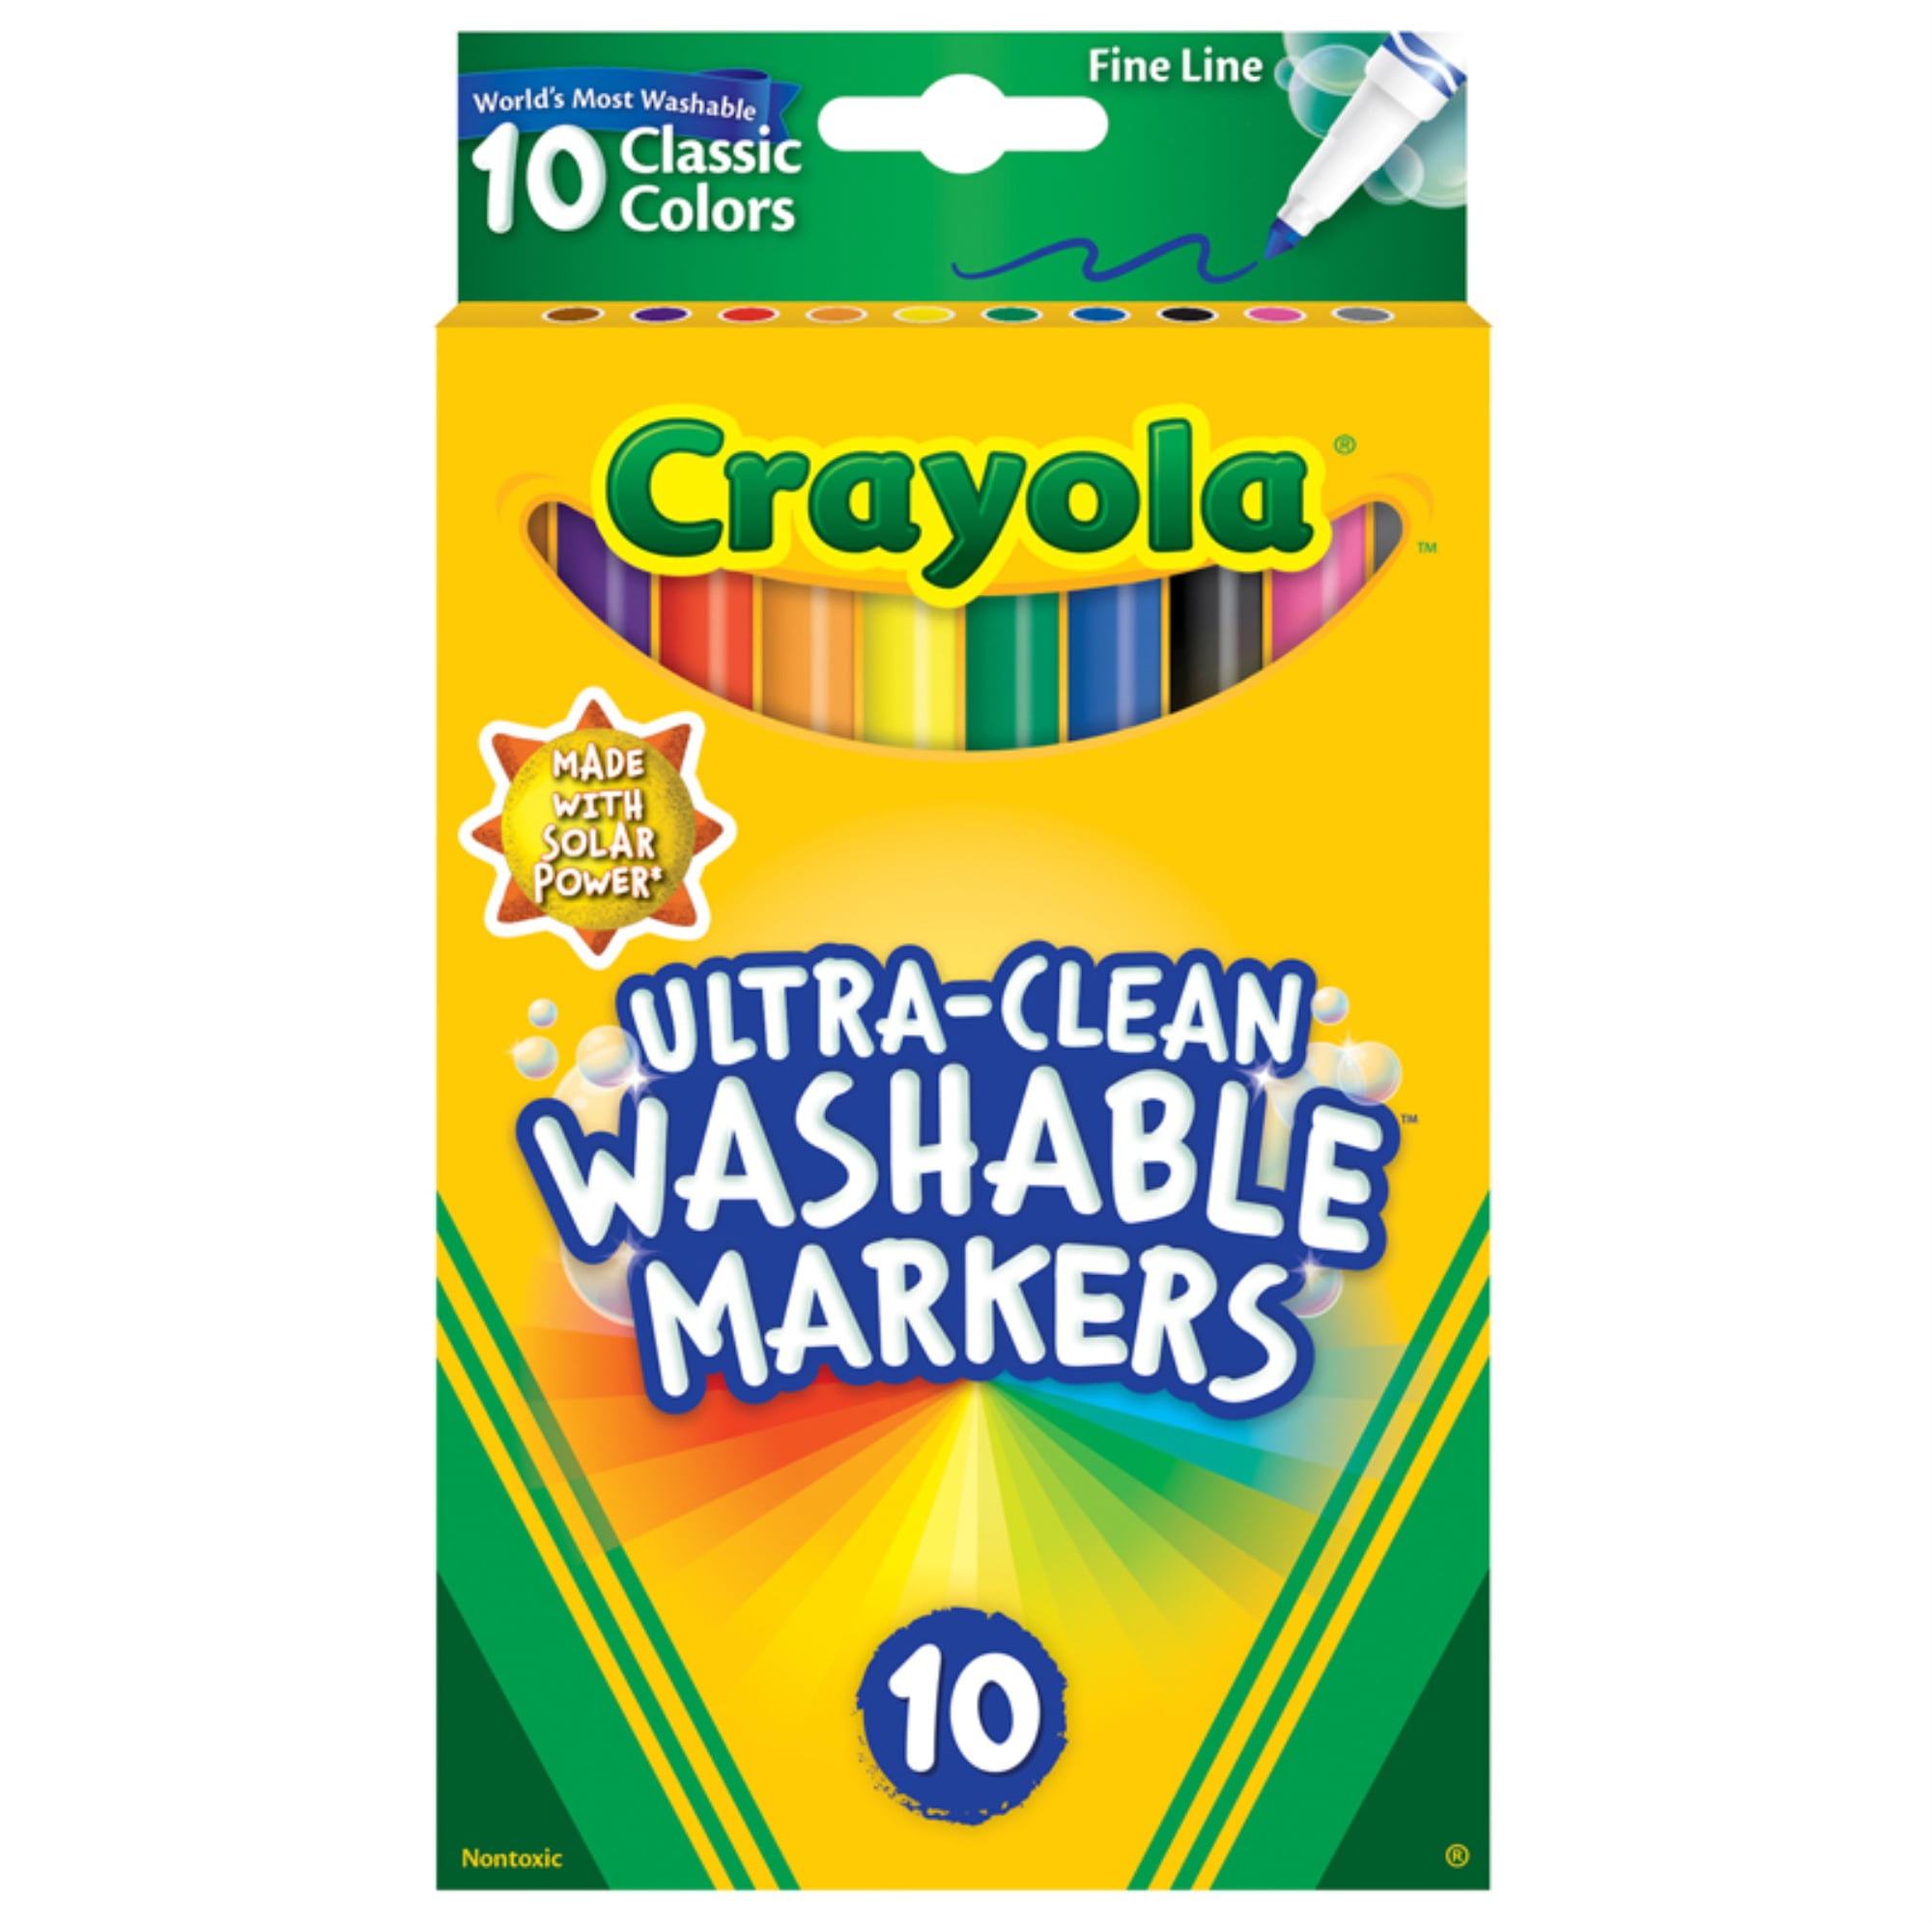 Crayola Super Tip Washable Marker Set, School Supplies for Teens, 20 Ct,  Art Gifts, Child Ages